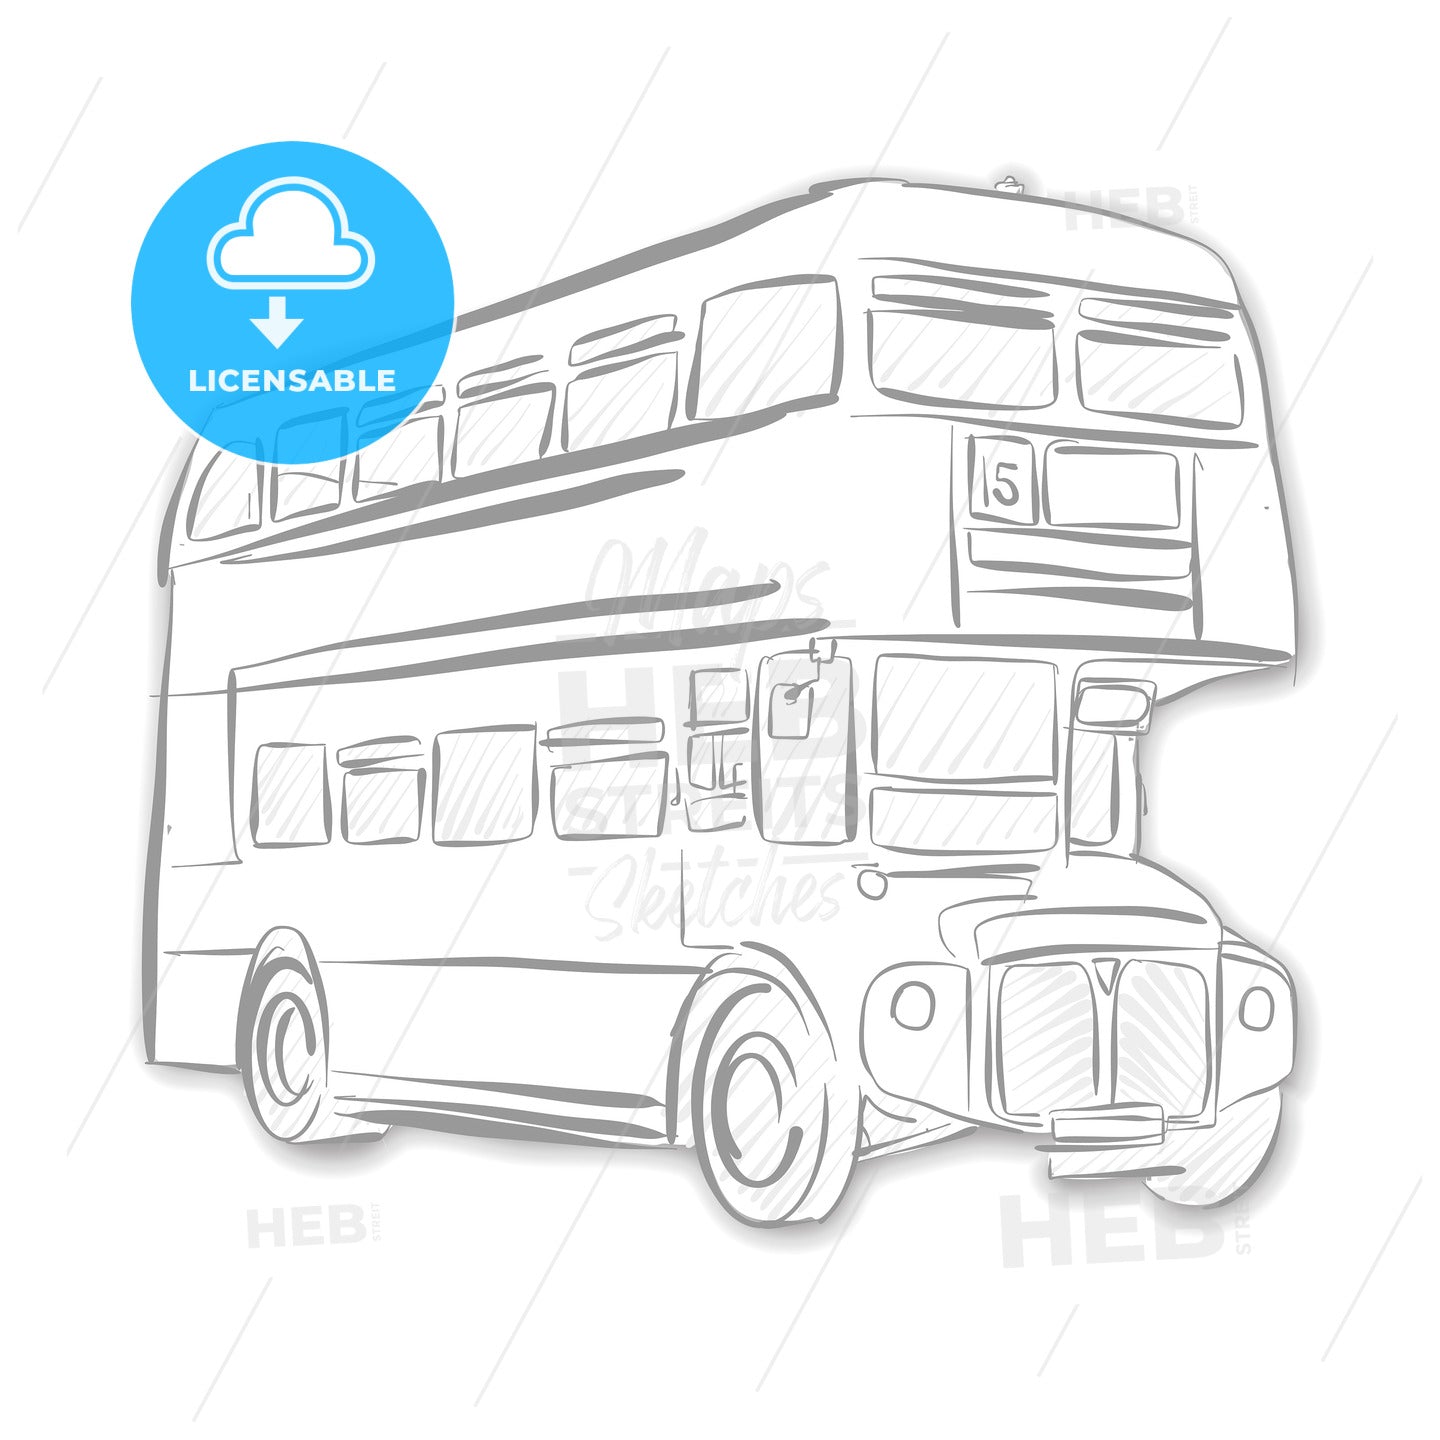 London Bus Black and White Sketch – instant download